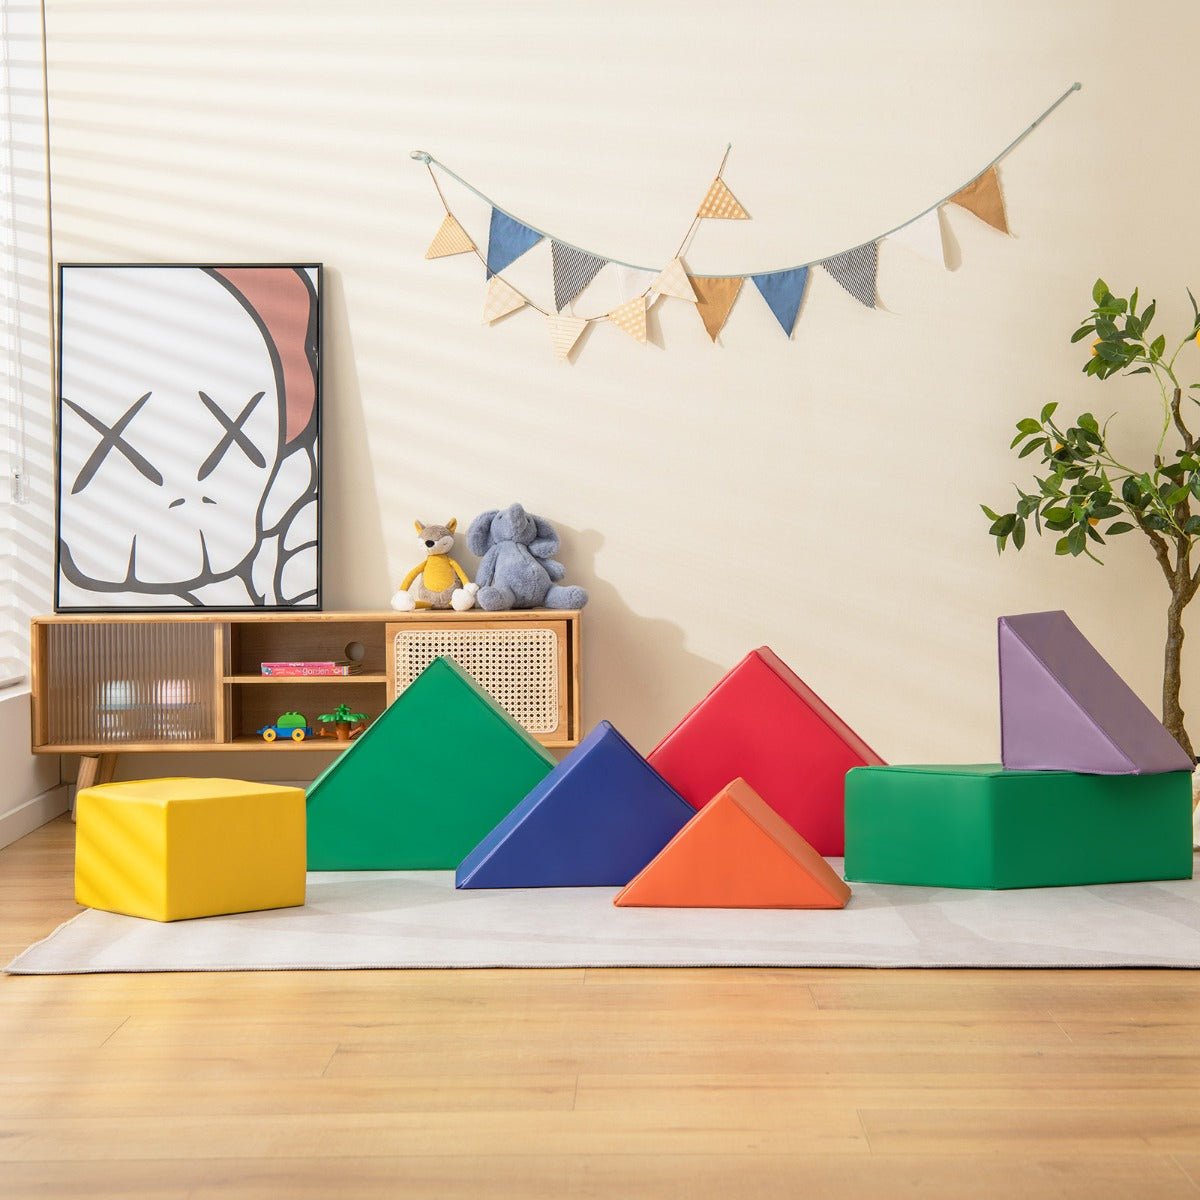 Fun and Learning Combined: 7-Piece Foam Play Set for Toddlers